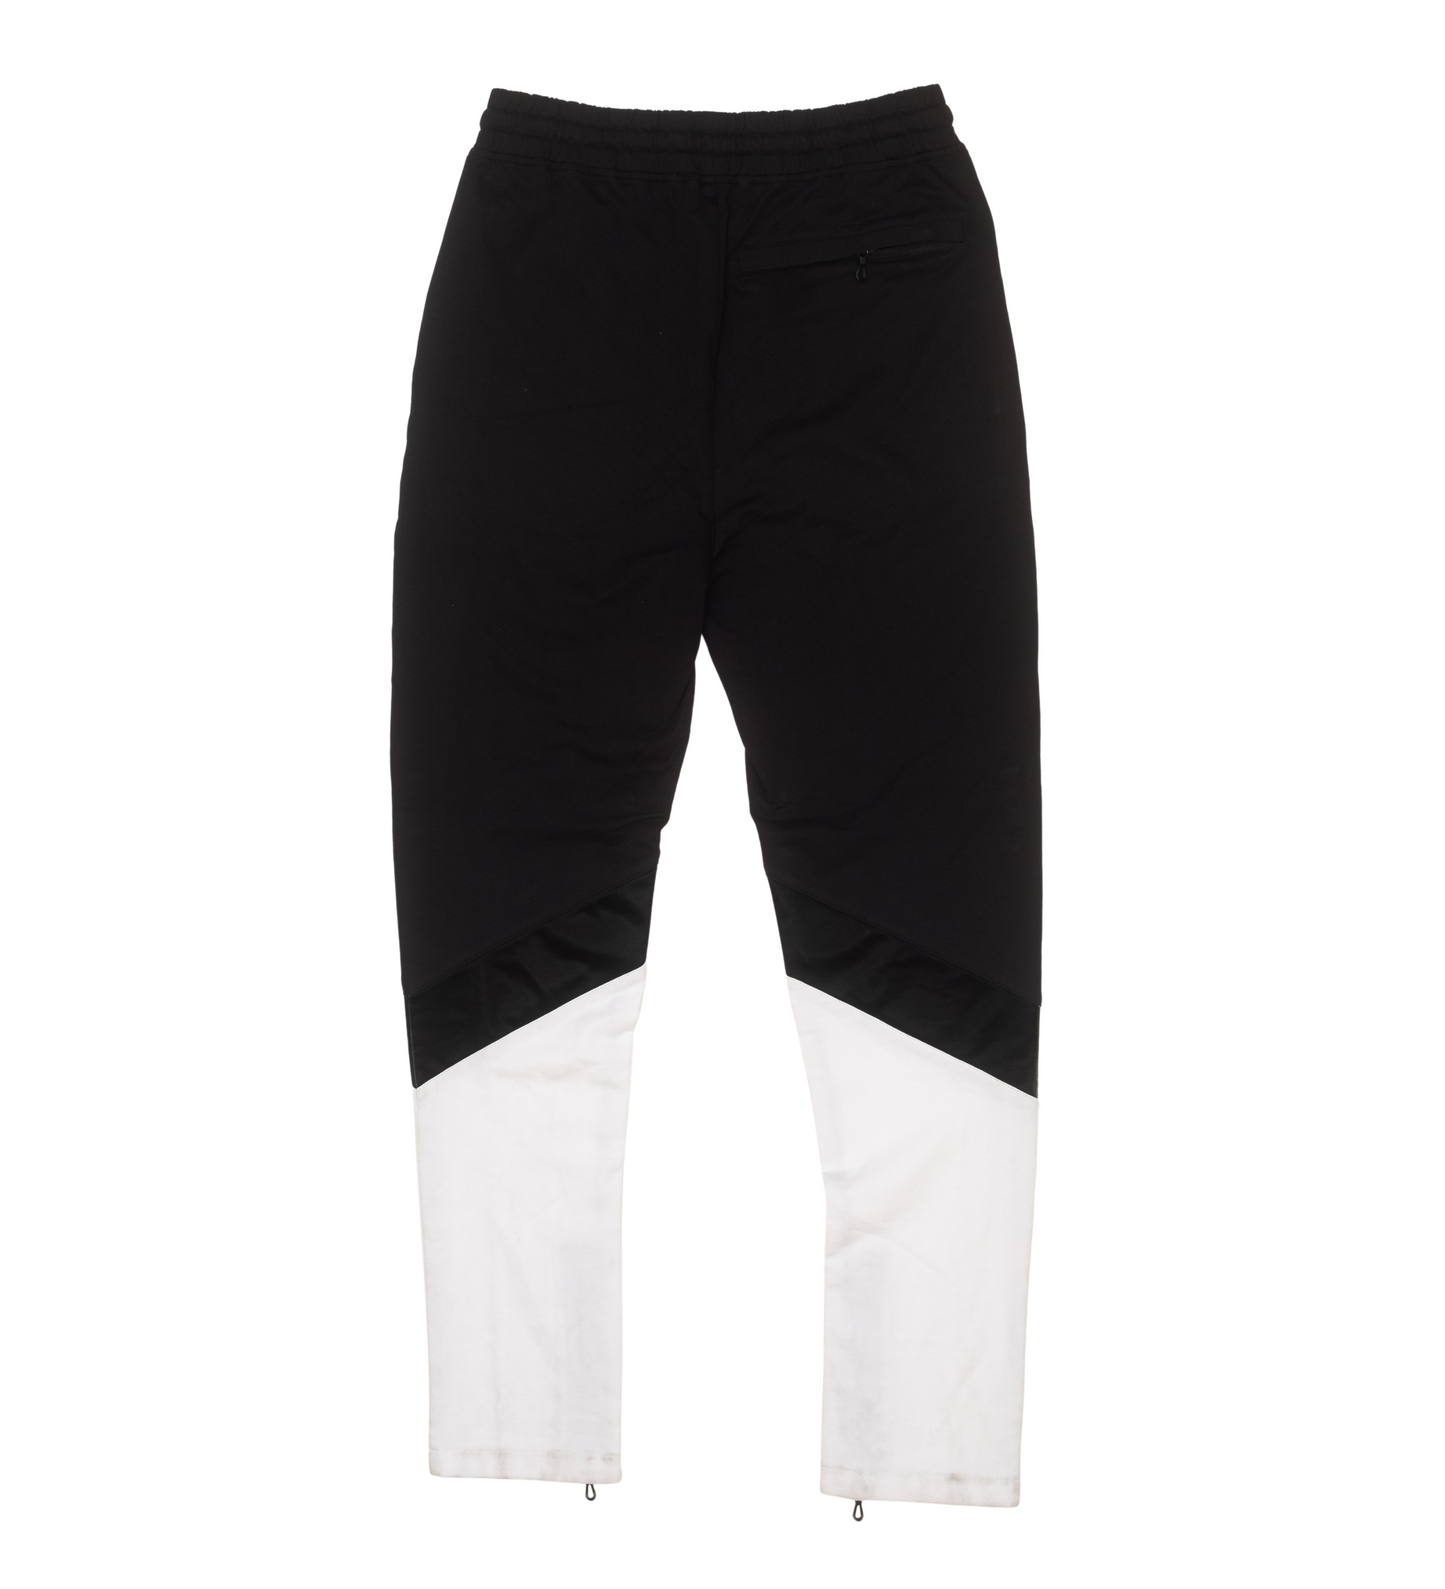 Wave hill track pant